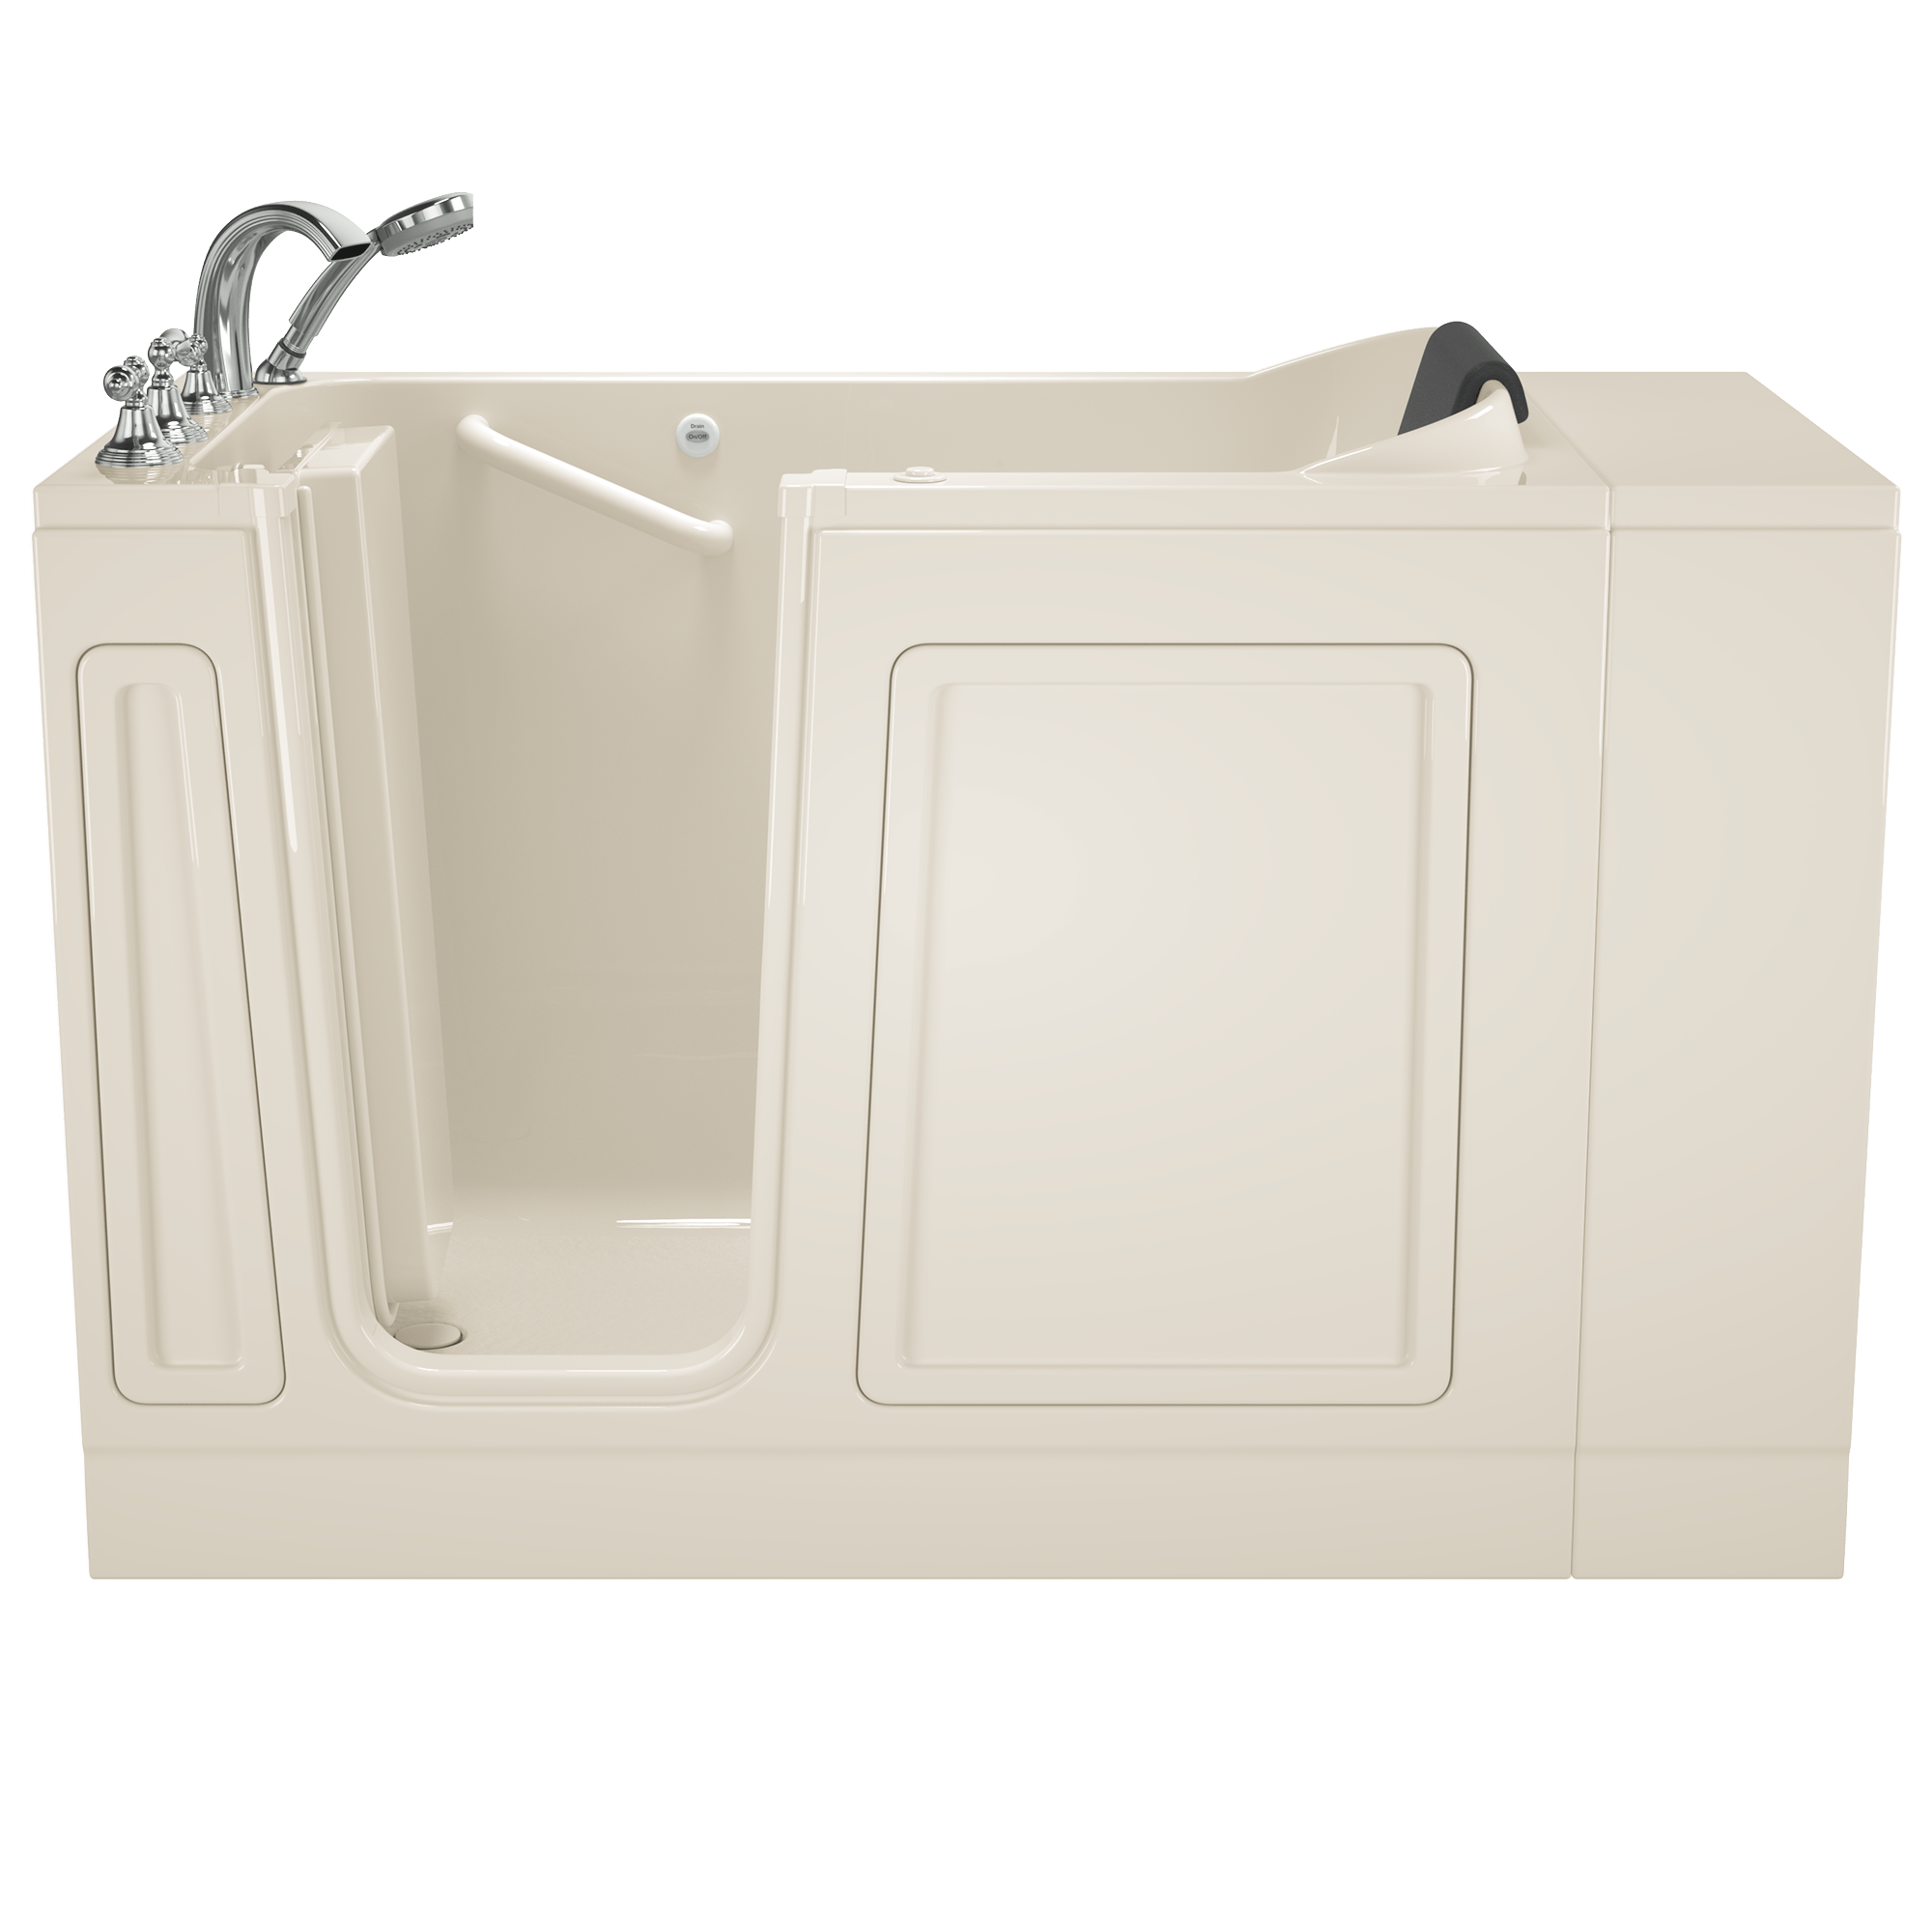 Acrylic Luxury Series 28 x 48 Inch Walk in Tub With Air Spa System   Left Hand Drain With Faucet WIB LINEN